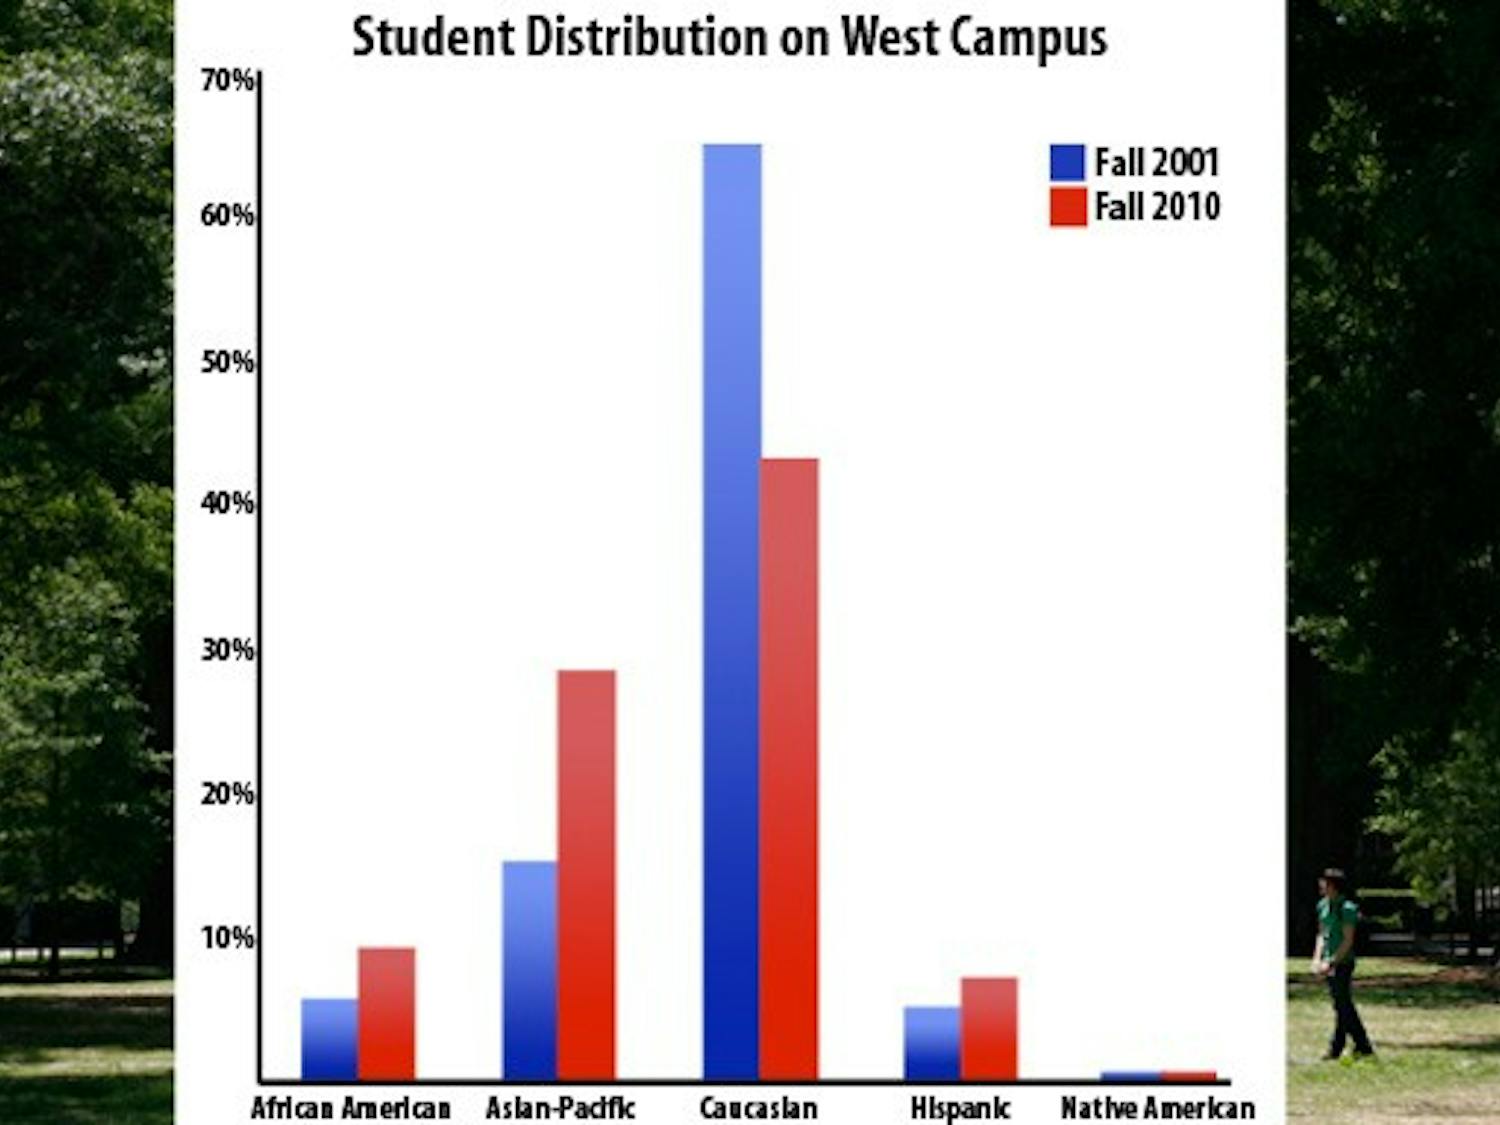 West Campus has become increasingly representative of the diversity of the student body since 2001.